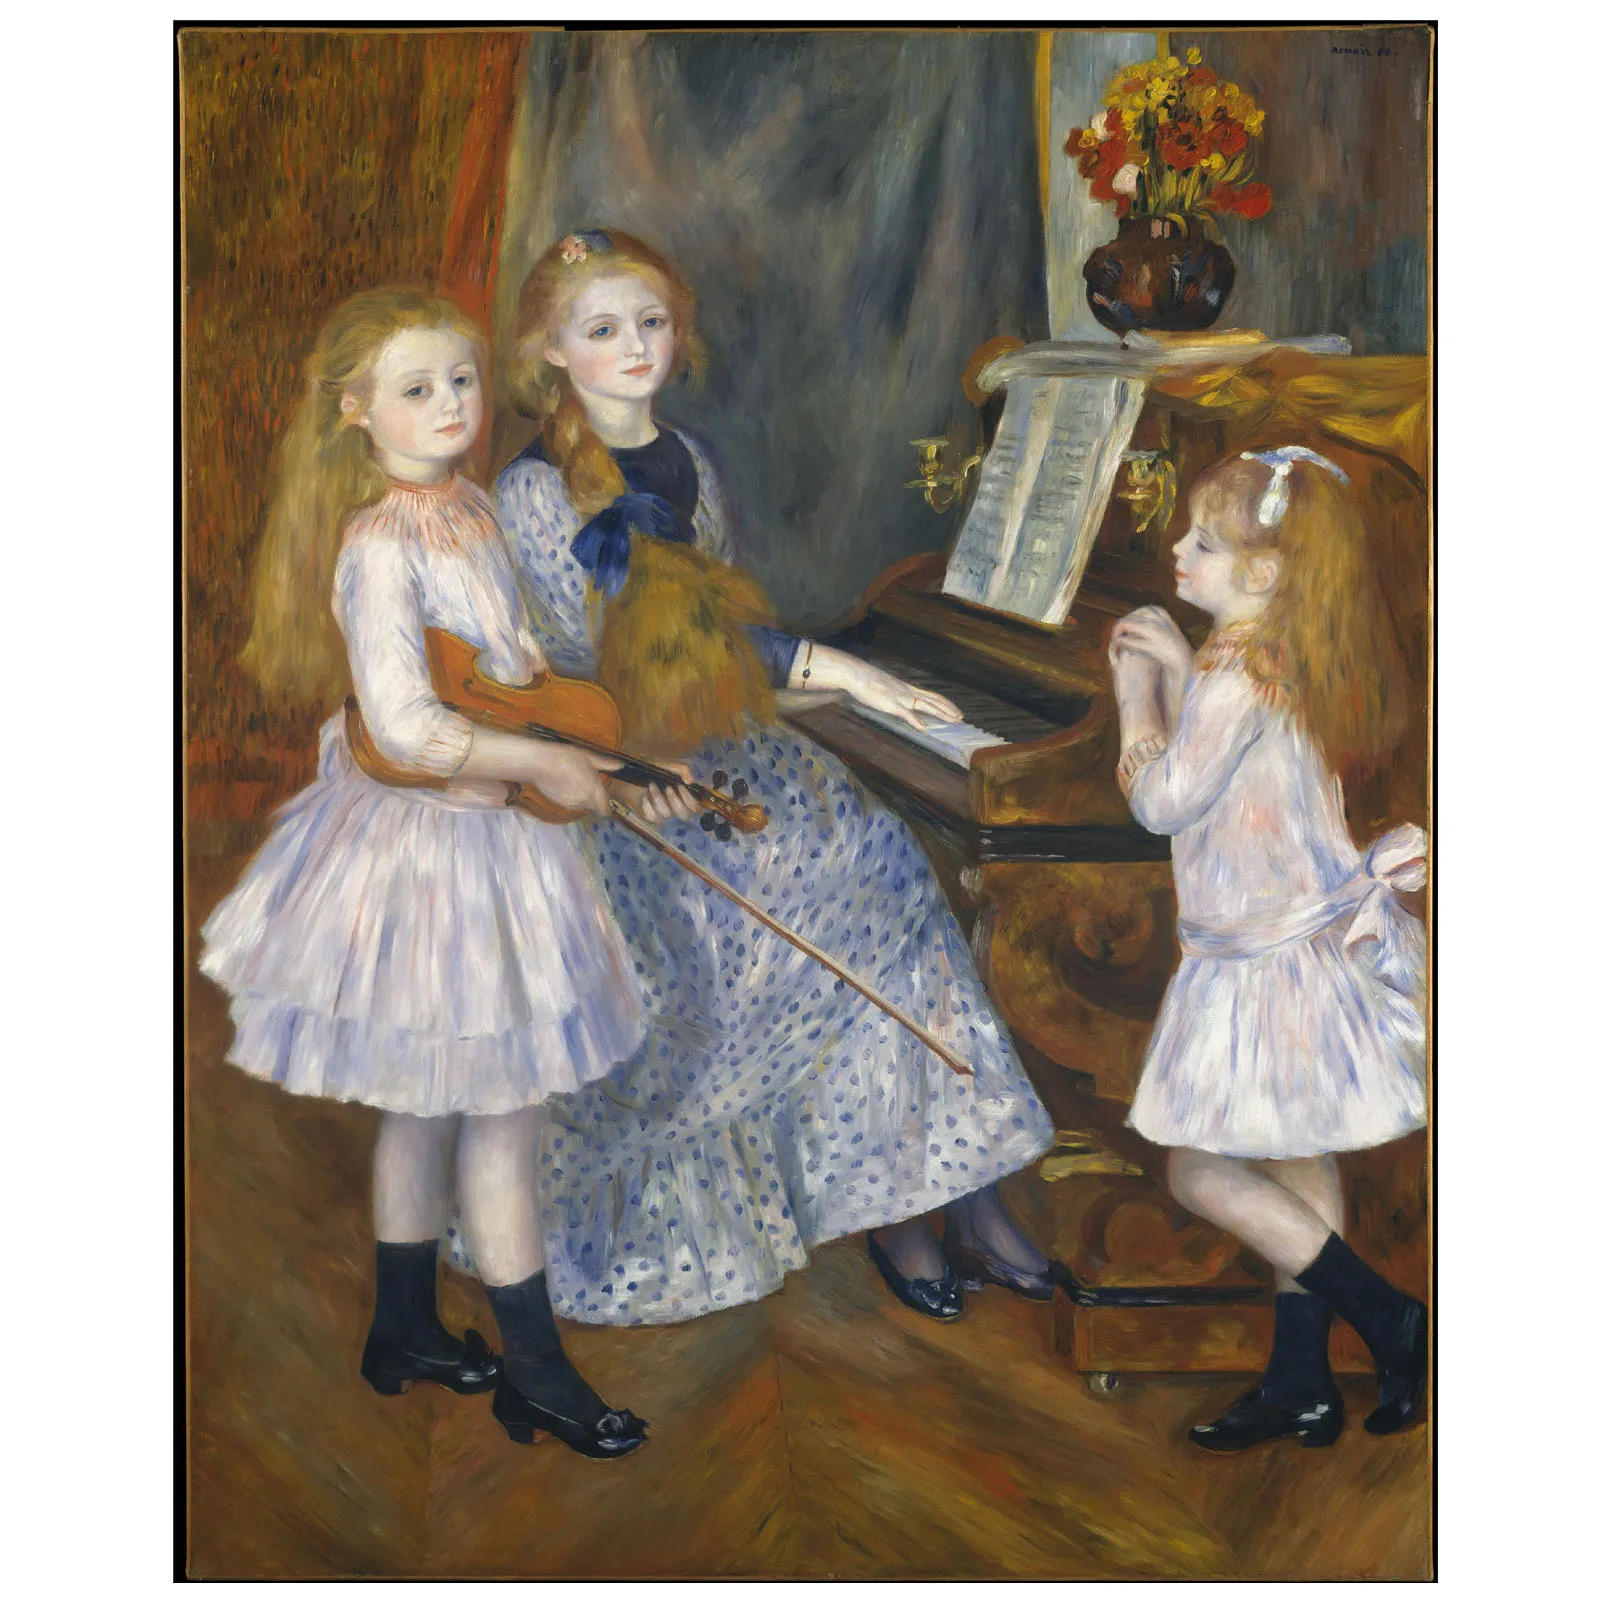 

Hand painted high quality reproduction of The Daughters of Catulle Mendes by Pierre-Auguste Renoir figure painting on canvas